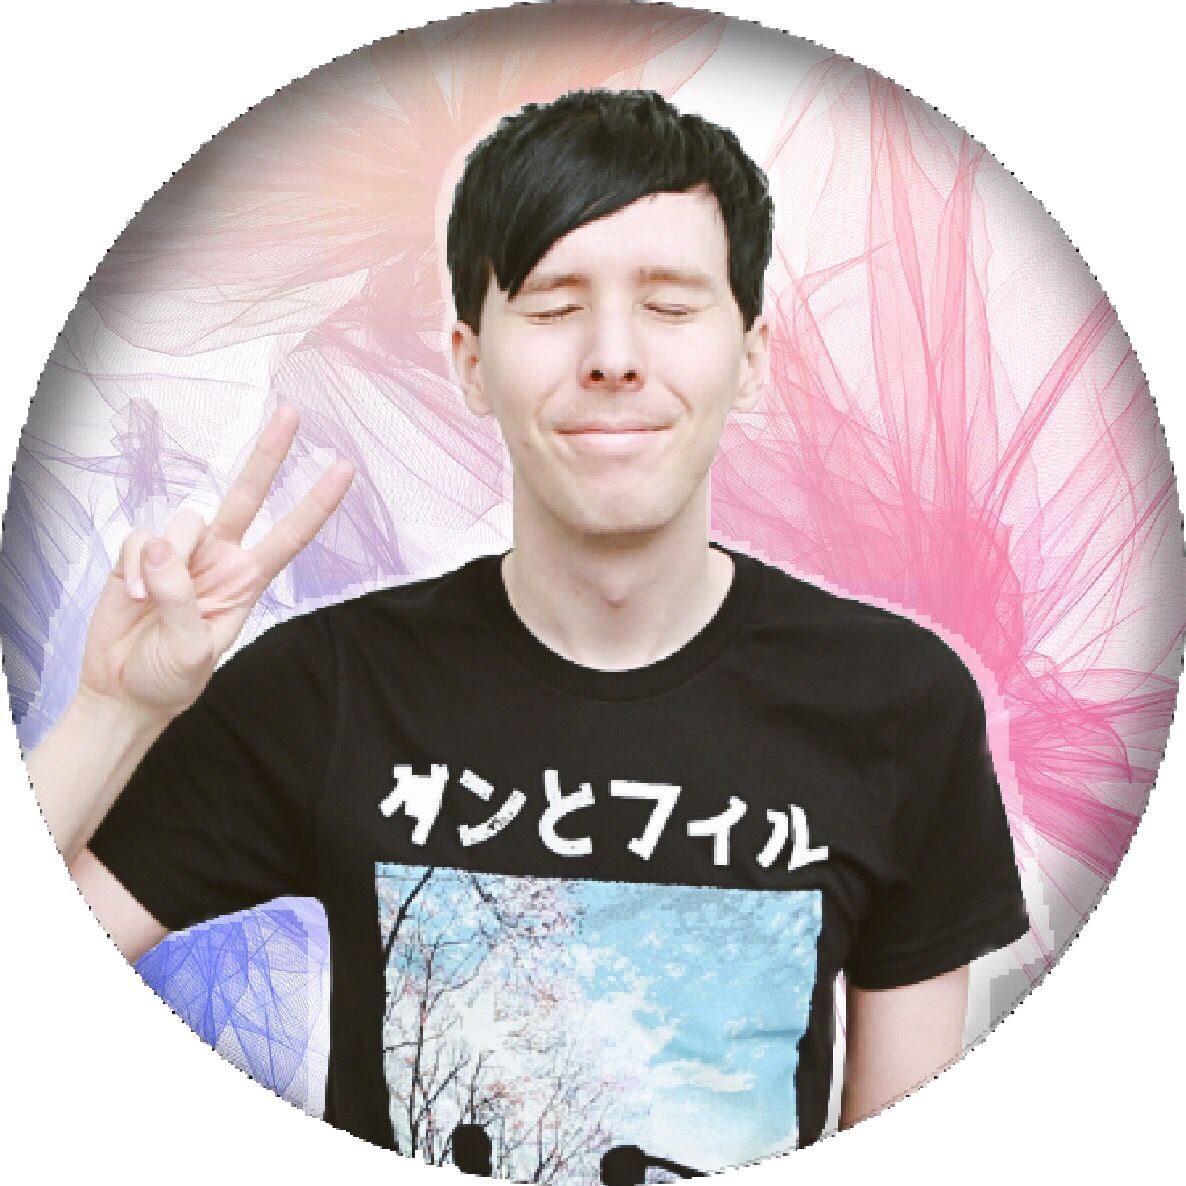 A Man With Black Hair And A Black Shirt With White Text And A Blue And White Graphic Design On It